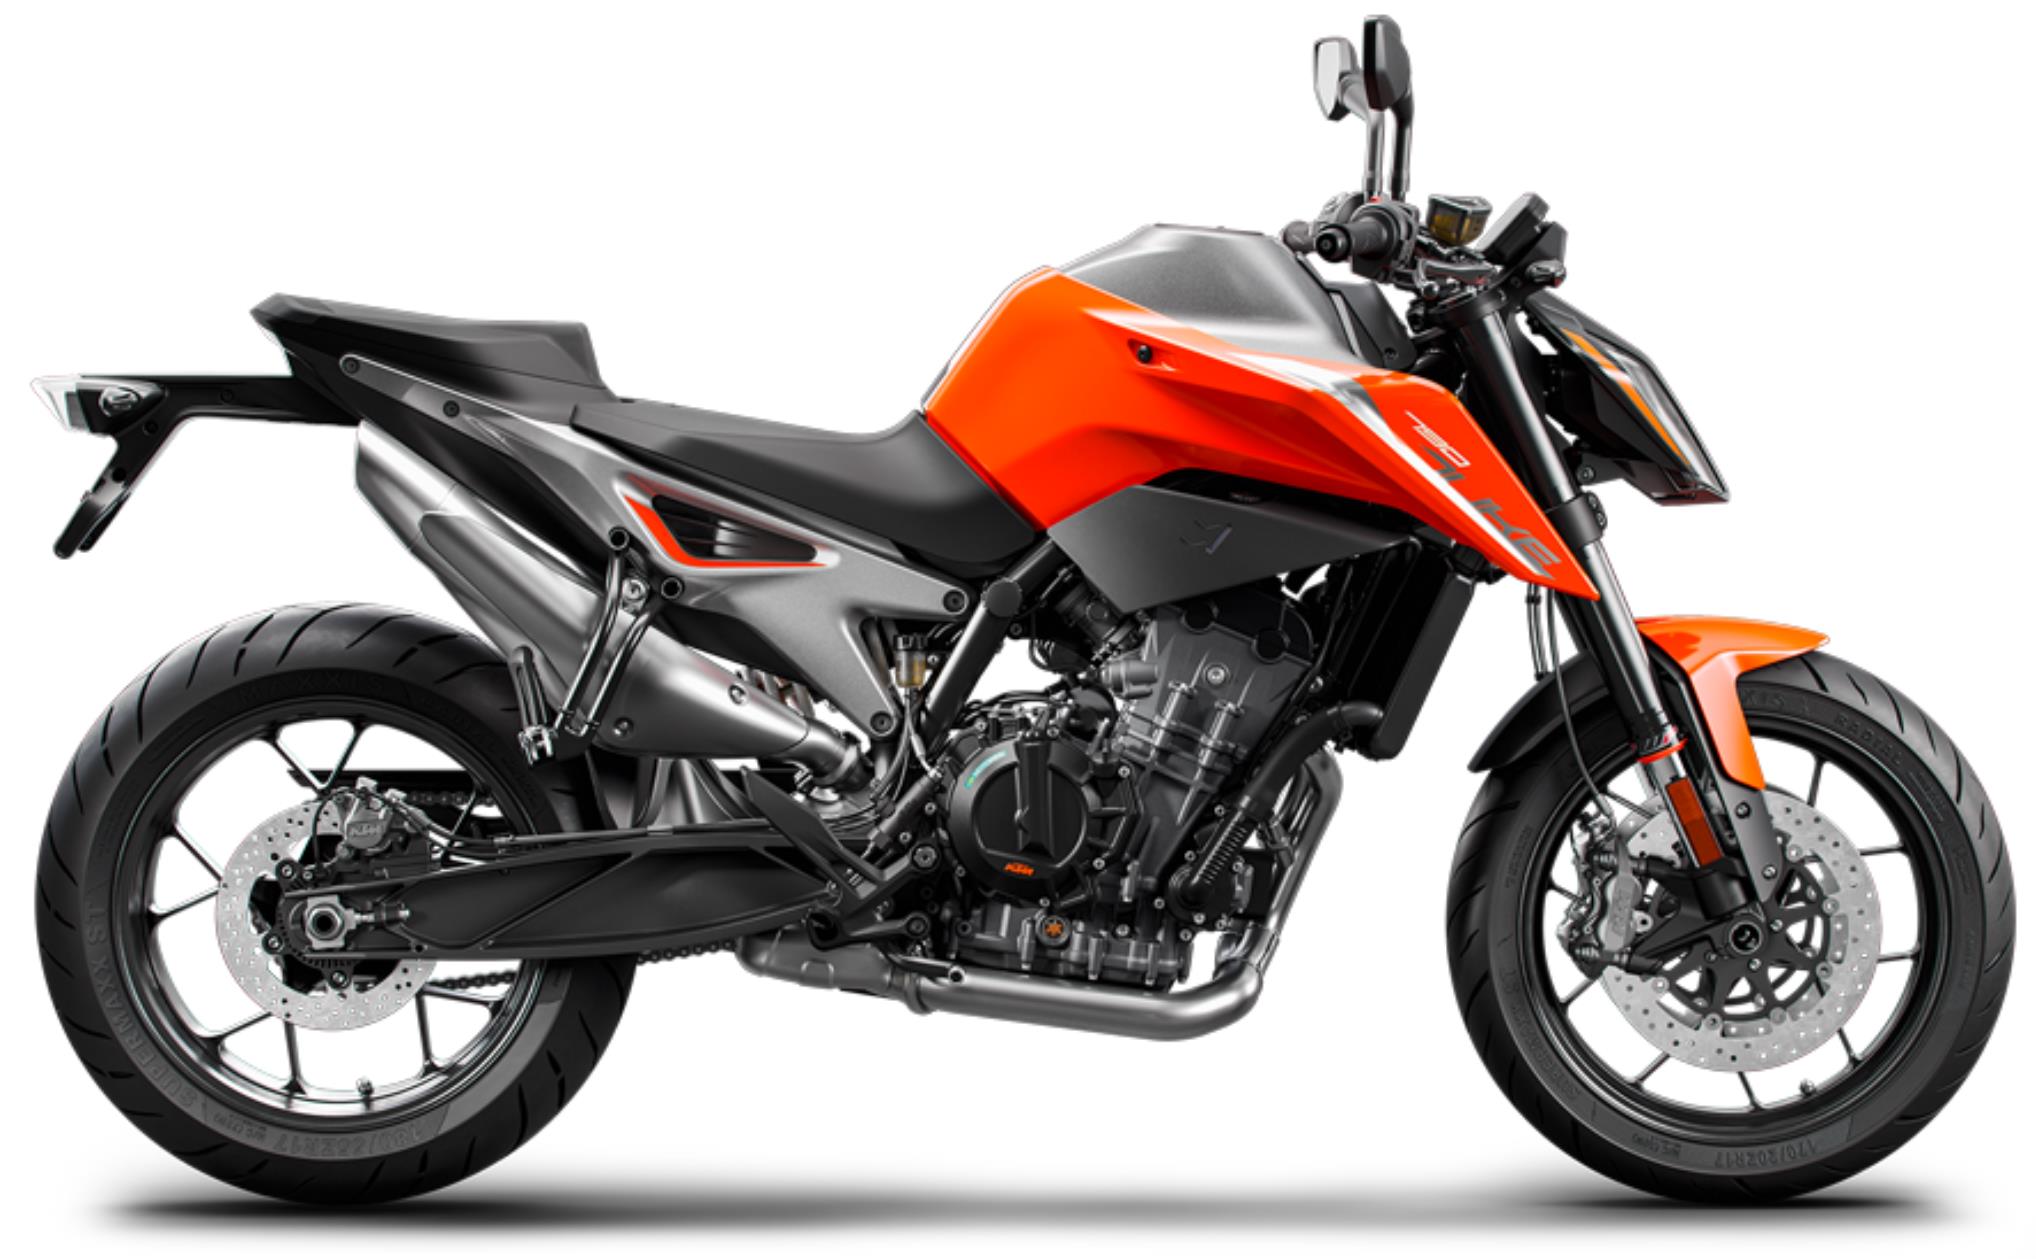 Ktm Duke 790 Price Specifications Mileage Top Speed In India